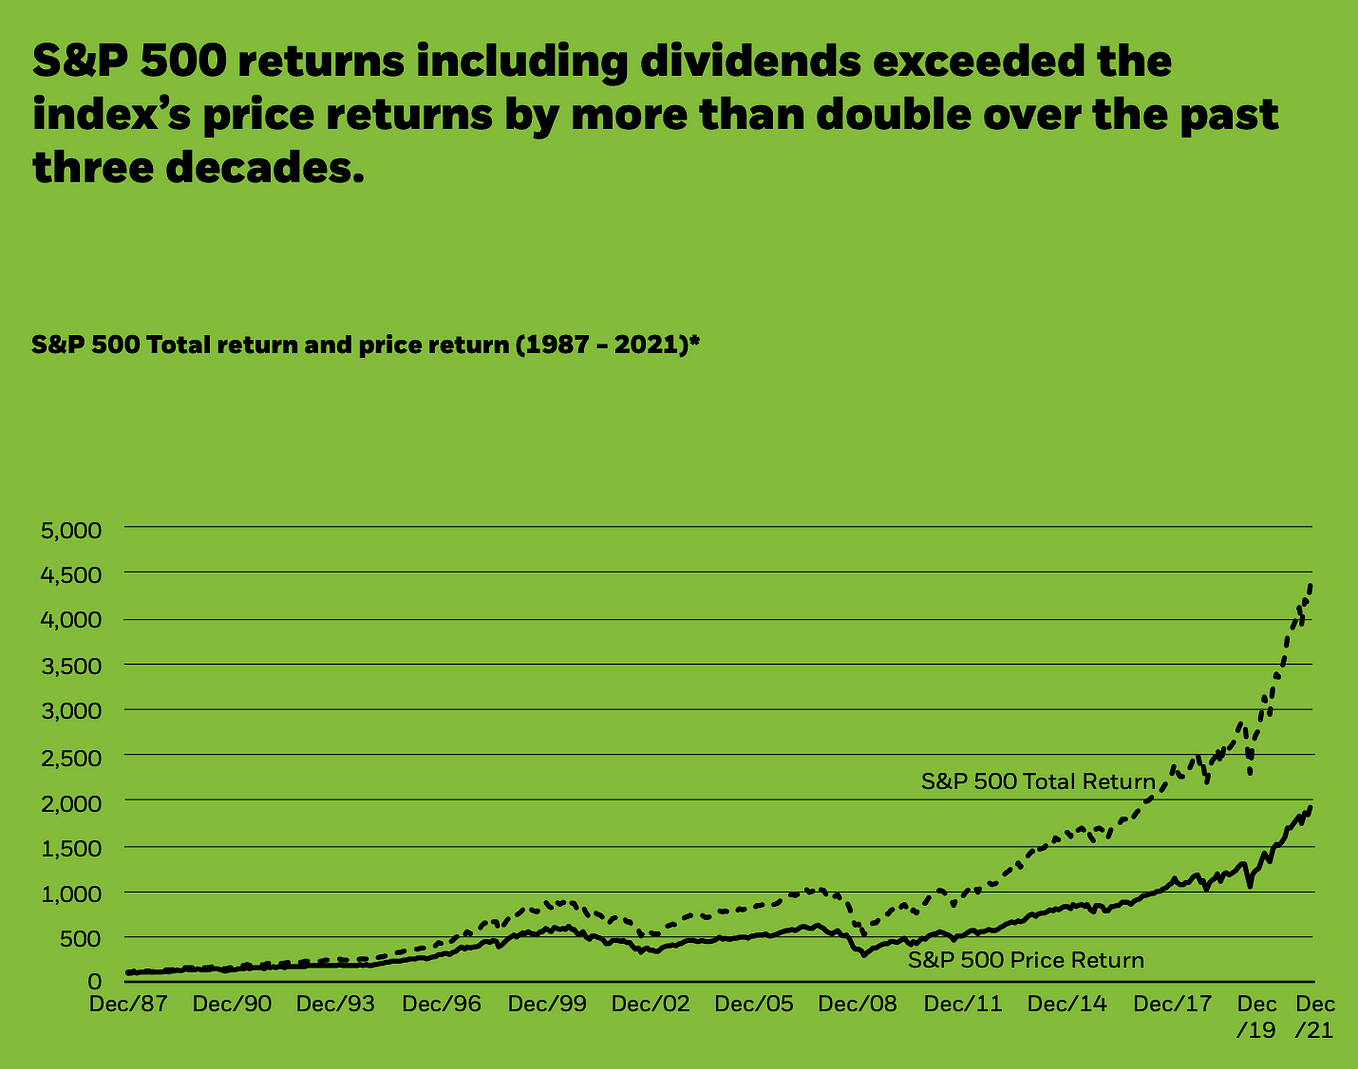 Dividend-Paying ETFs — My Thoughts